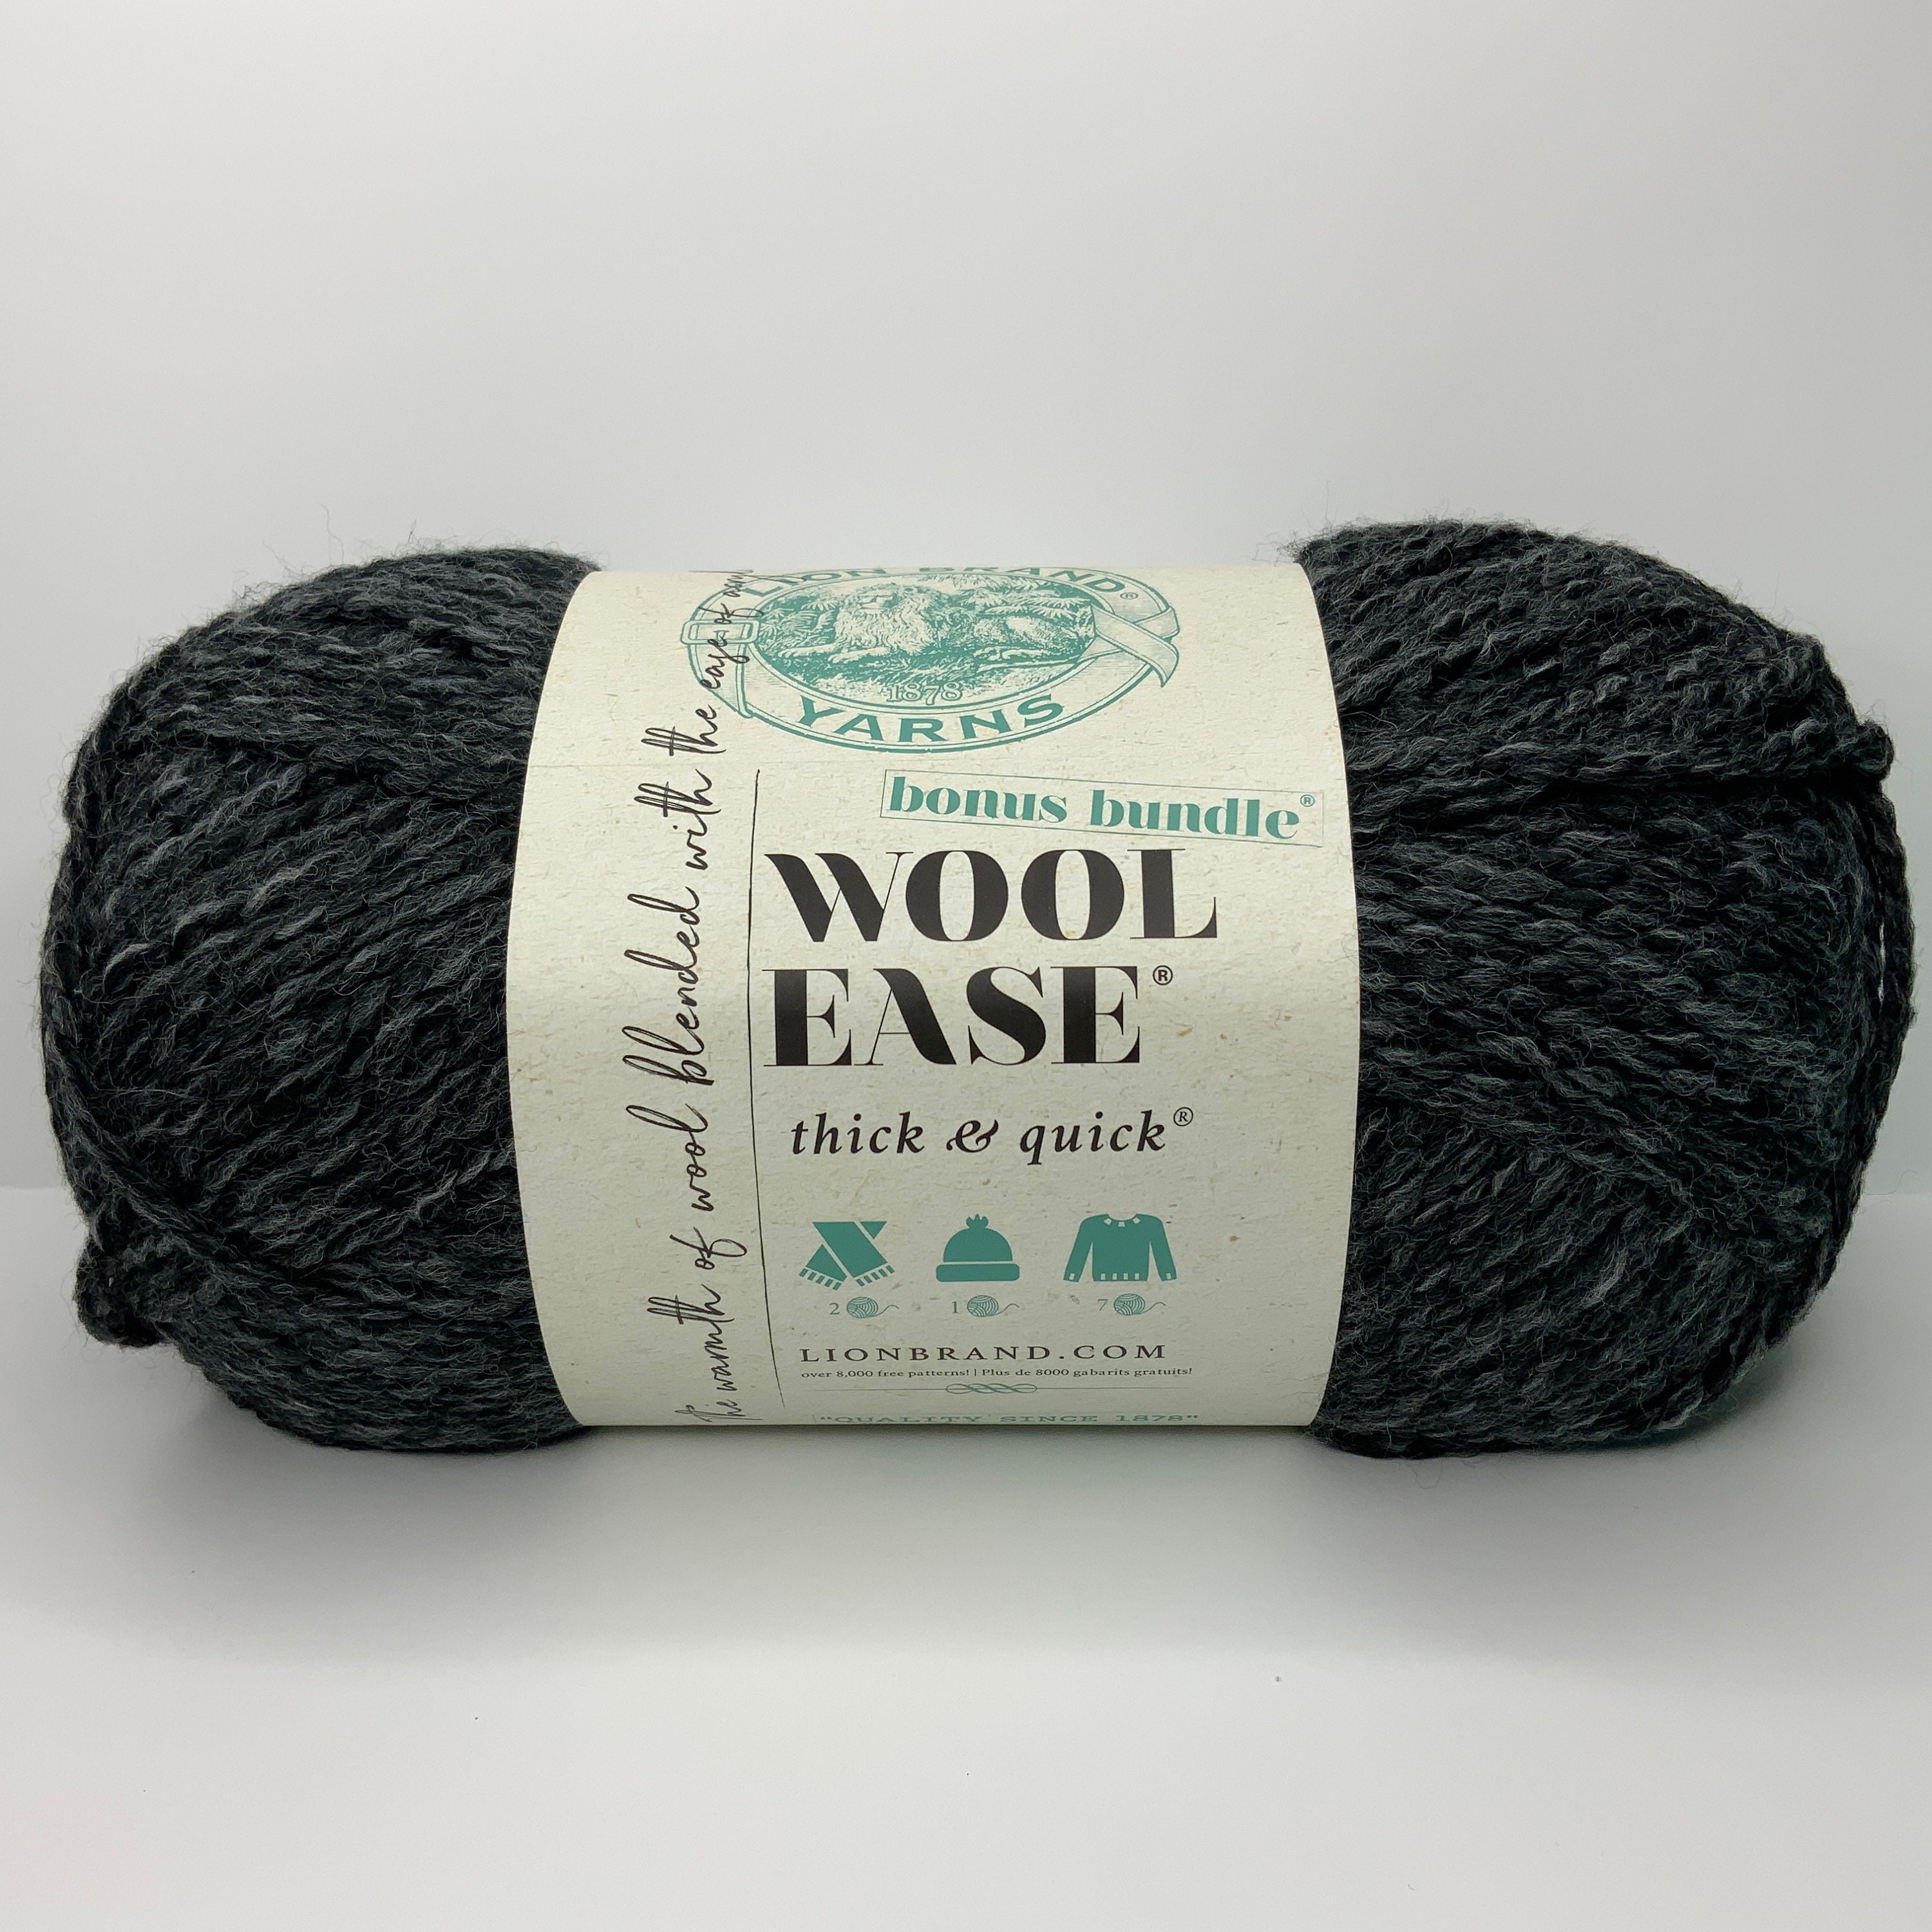 Buy Charcoal Wool-ease Thick and Quick Bonus Bundle Yarn Online in